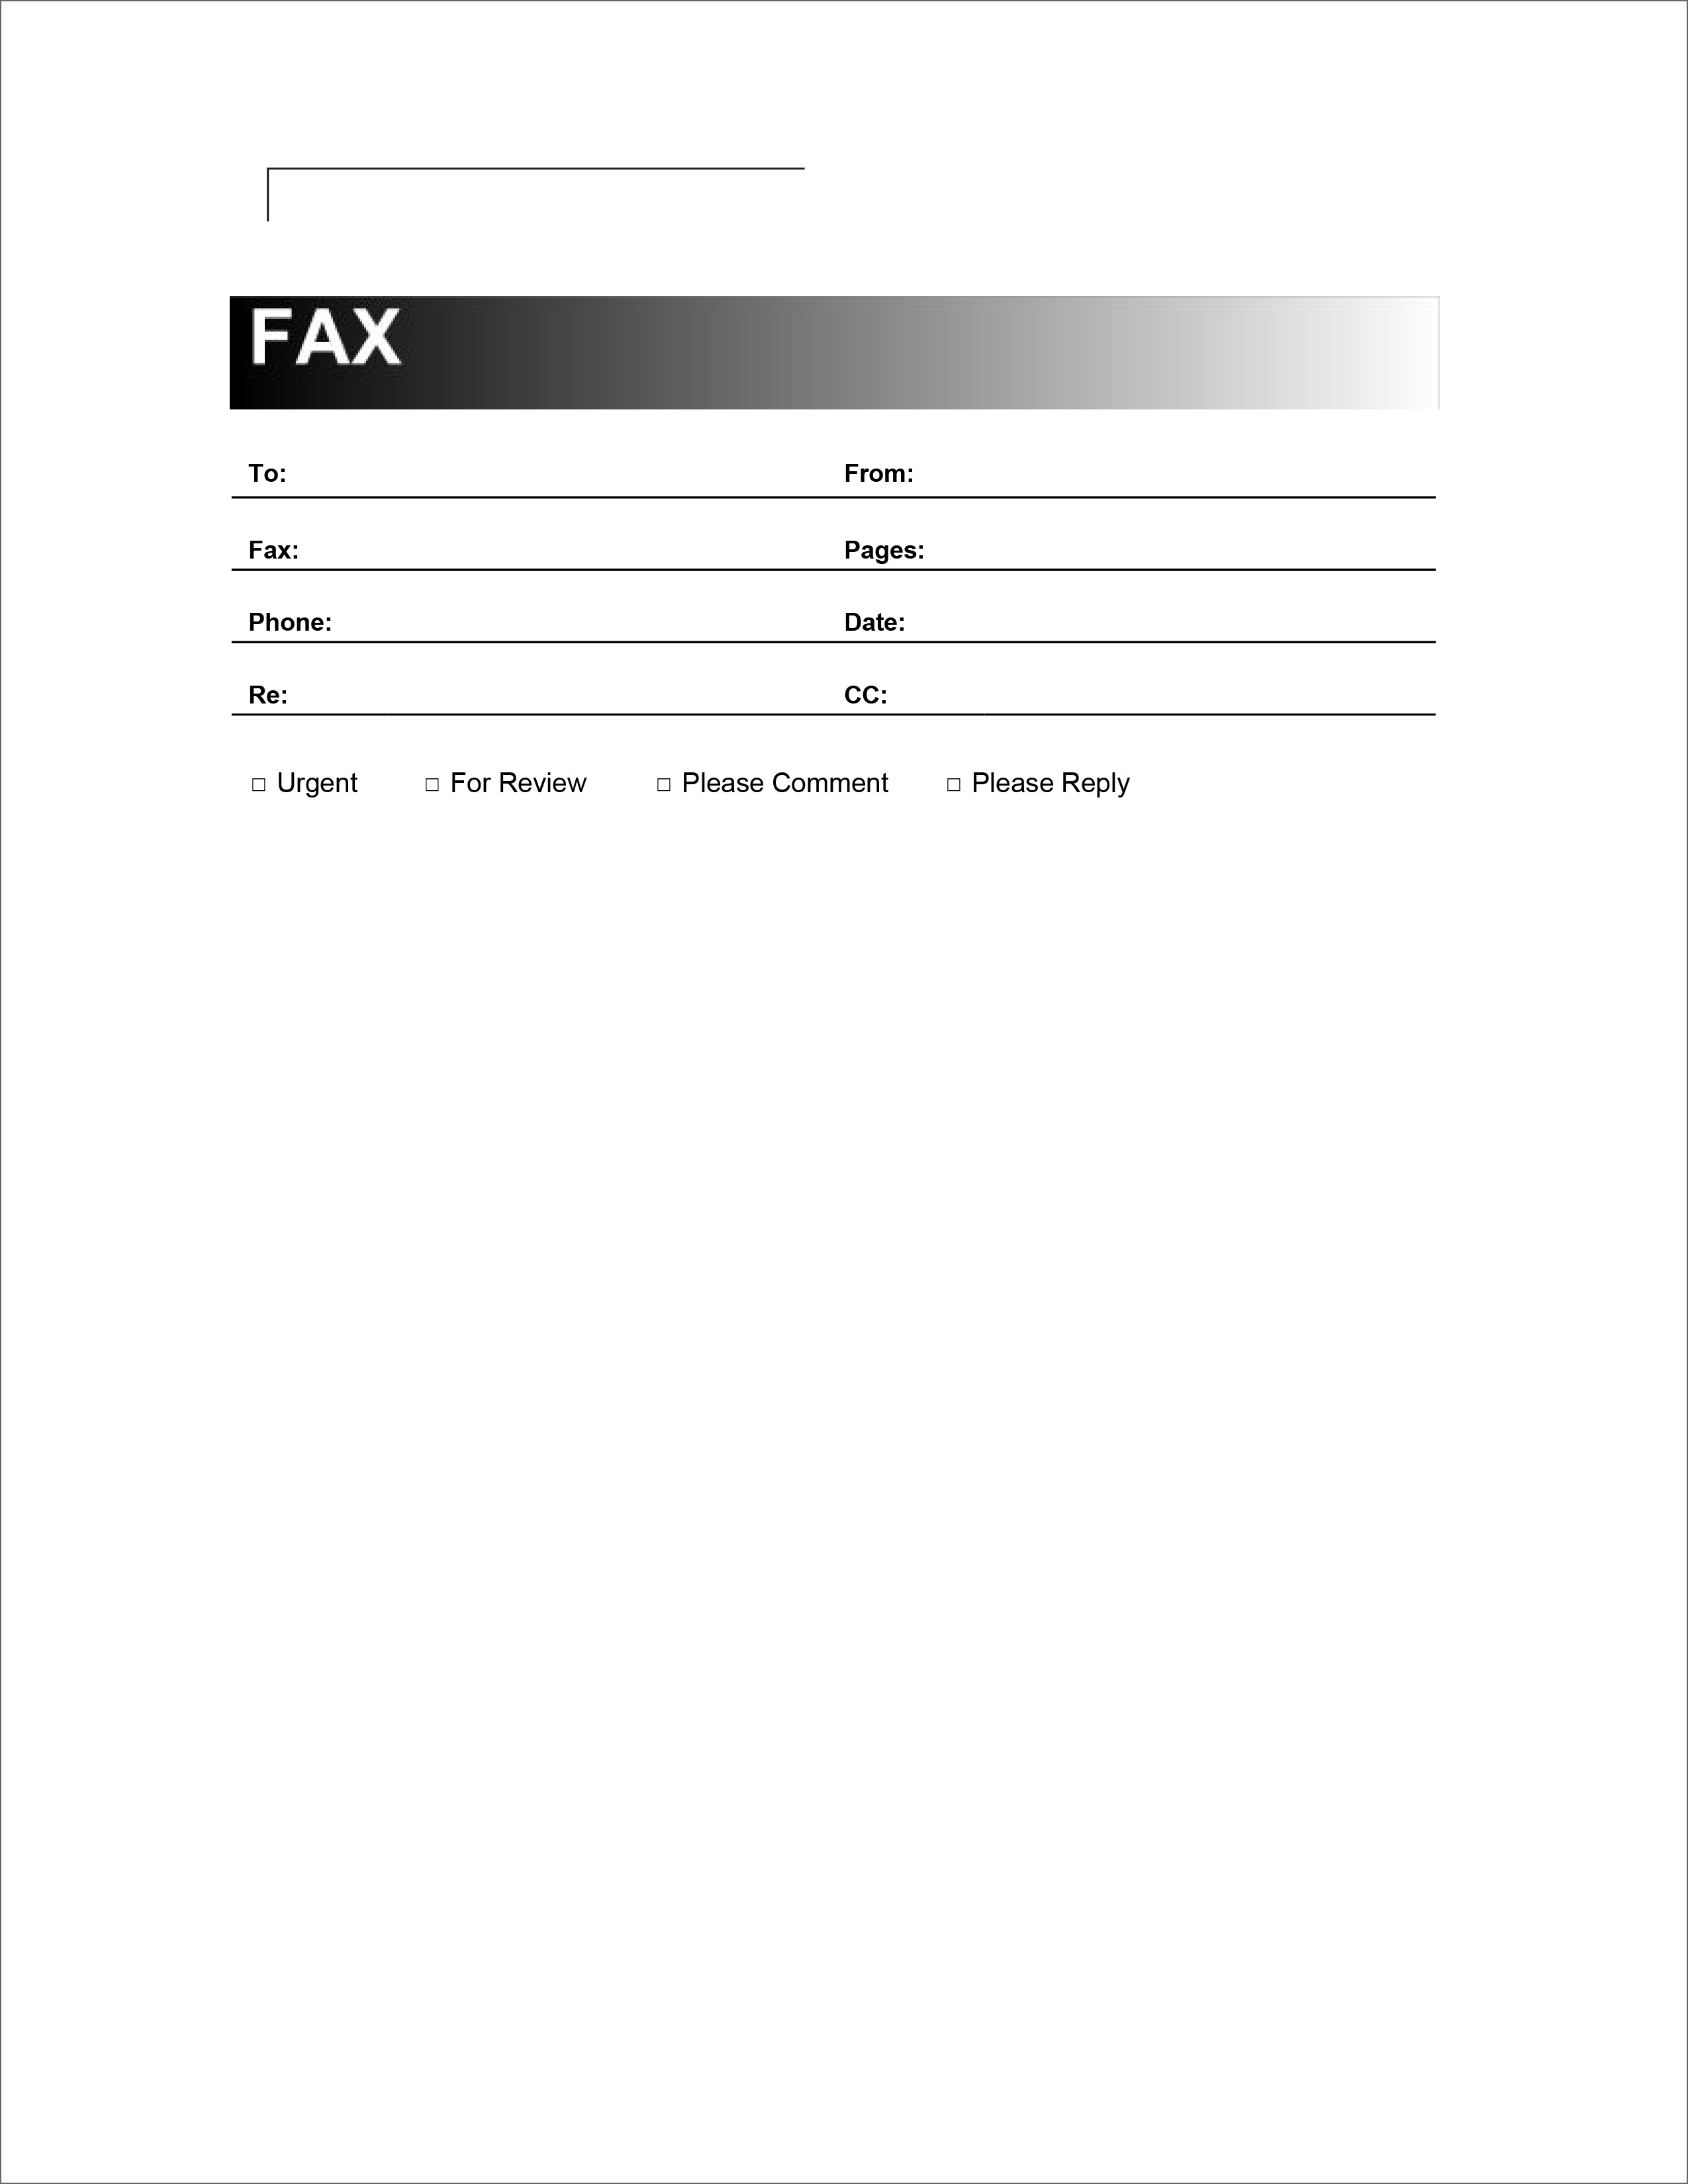 030 Fax Cover Sheet Template Ideas Simple Formidable Blank Inside Fax Template Word 2010